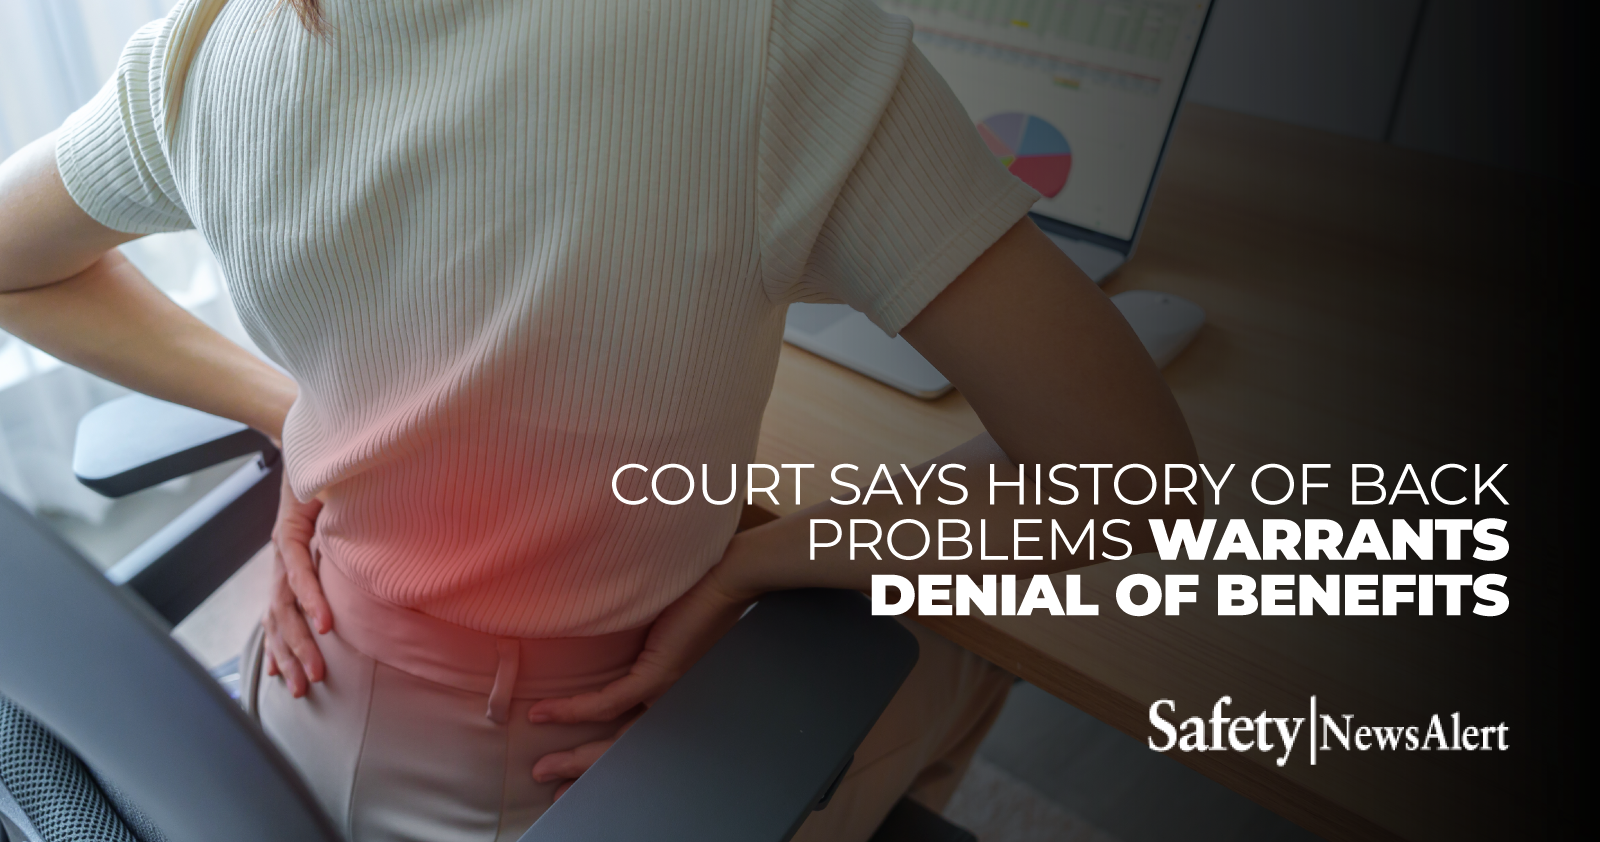 Court says history of back problems warrants denial of benefits